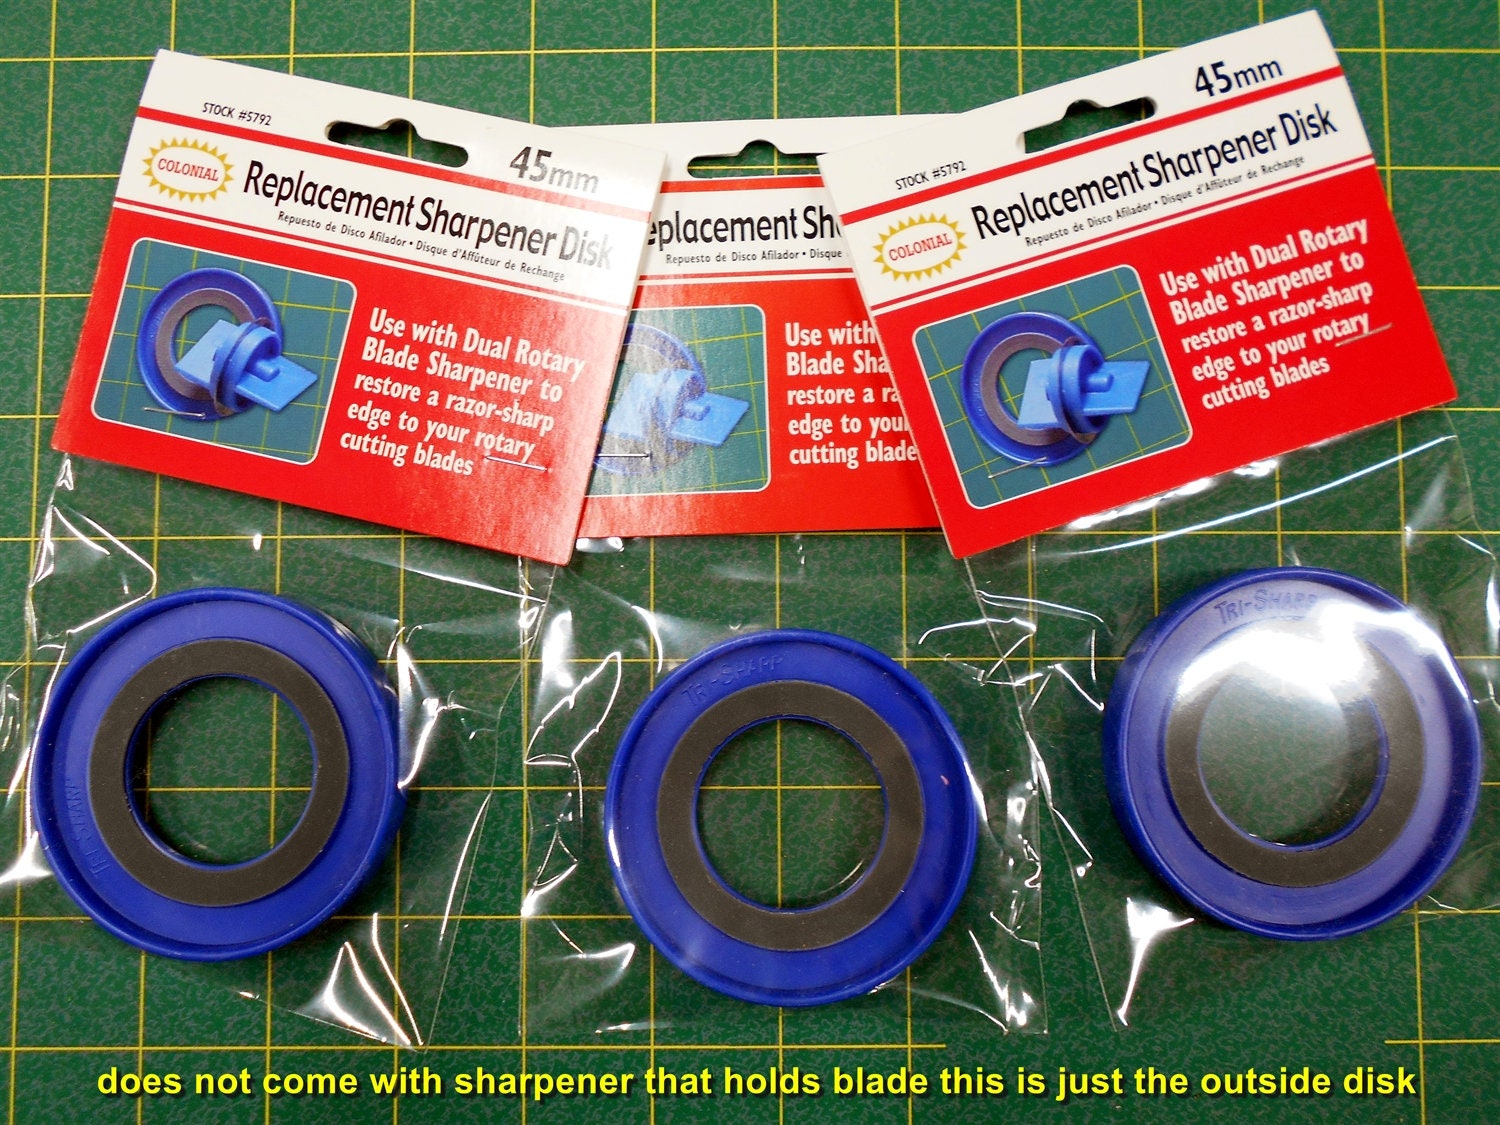 Rotary Sharpener Replacement Disk/does Not Come With Sharpener 45mm Rotary  Blades/restore a Razor Sharp Edge to Rotary Cutter Blades 580 -  Sweden